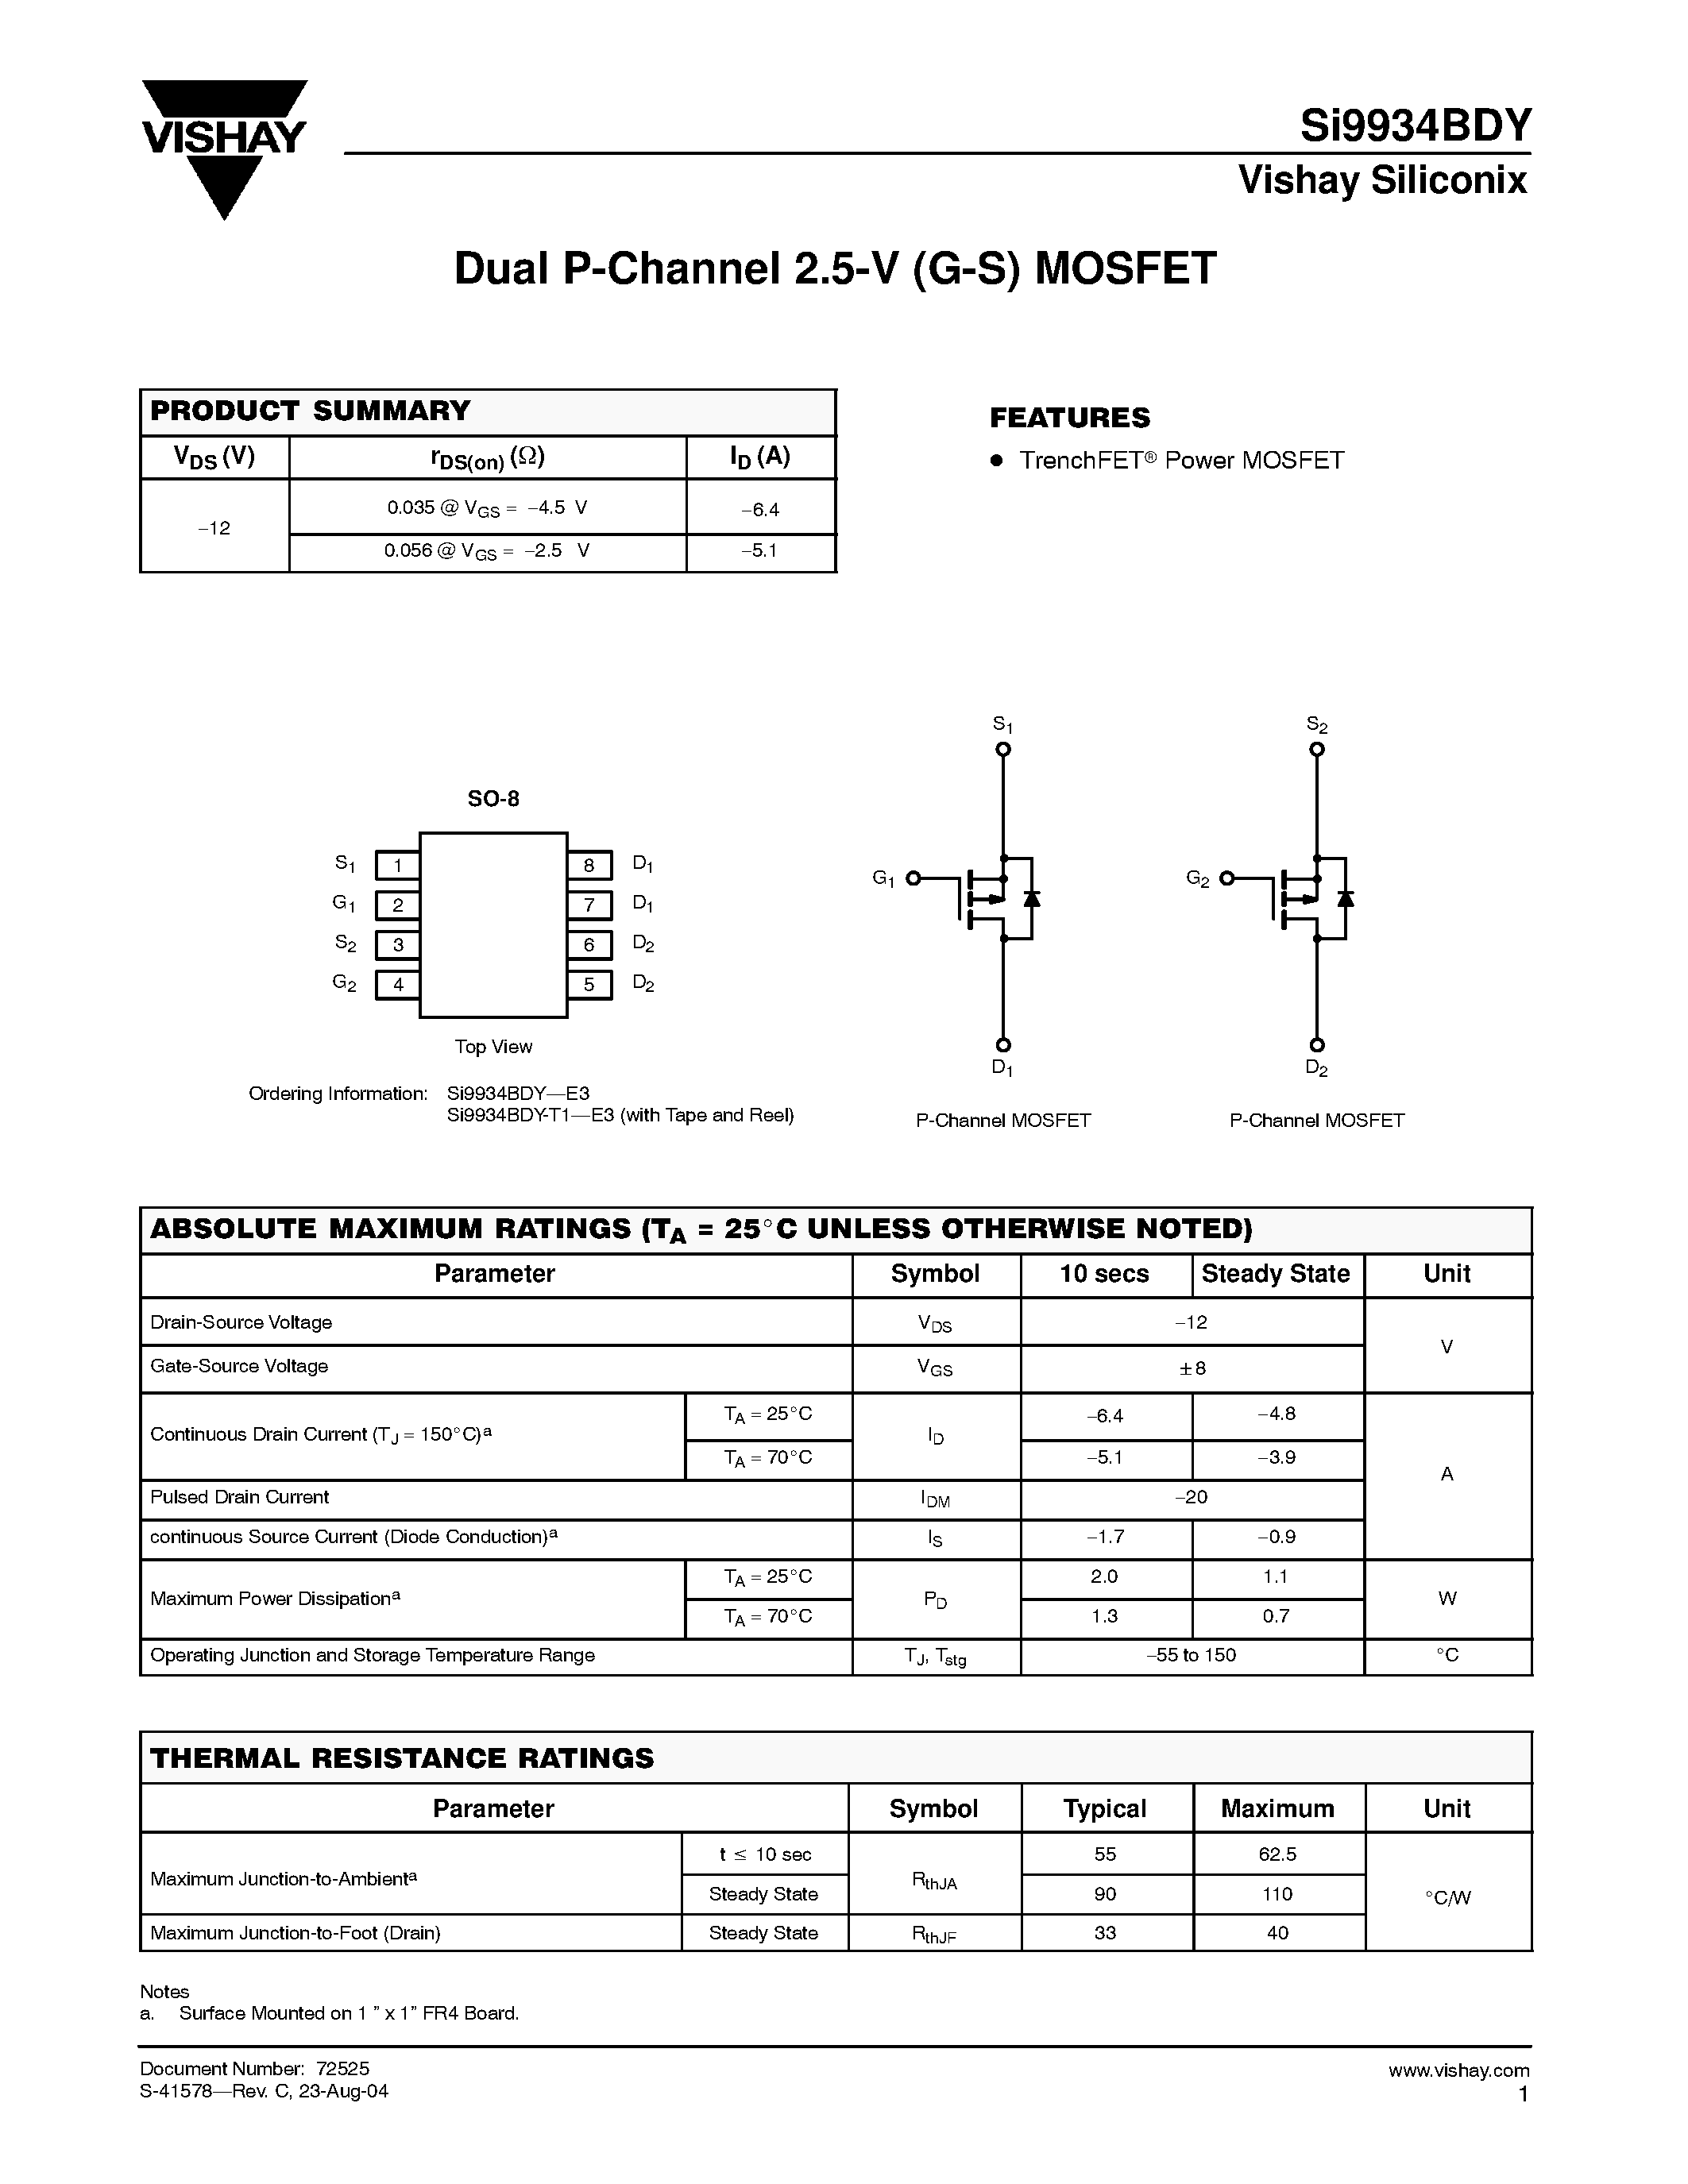 Даташит SI9934BDY - Dual P-Channel 2.5-V (G-S) MOSFET страница 1